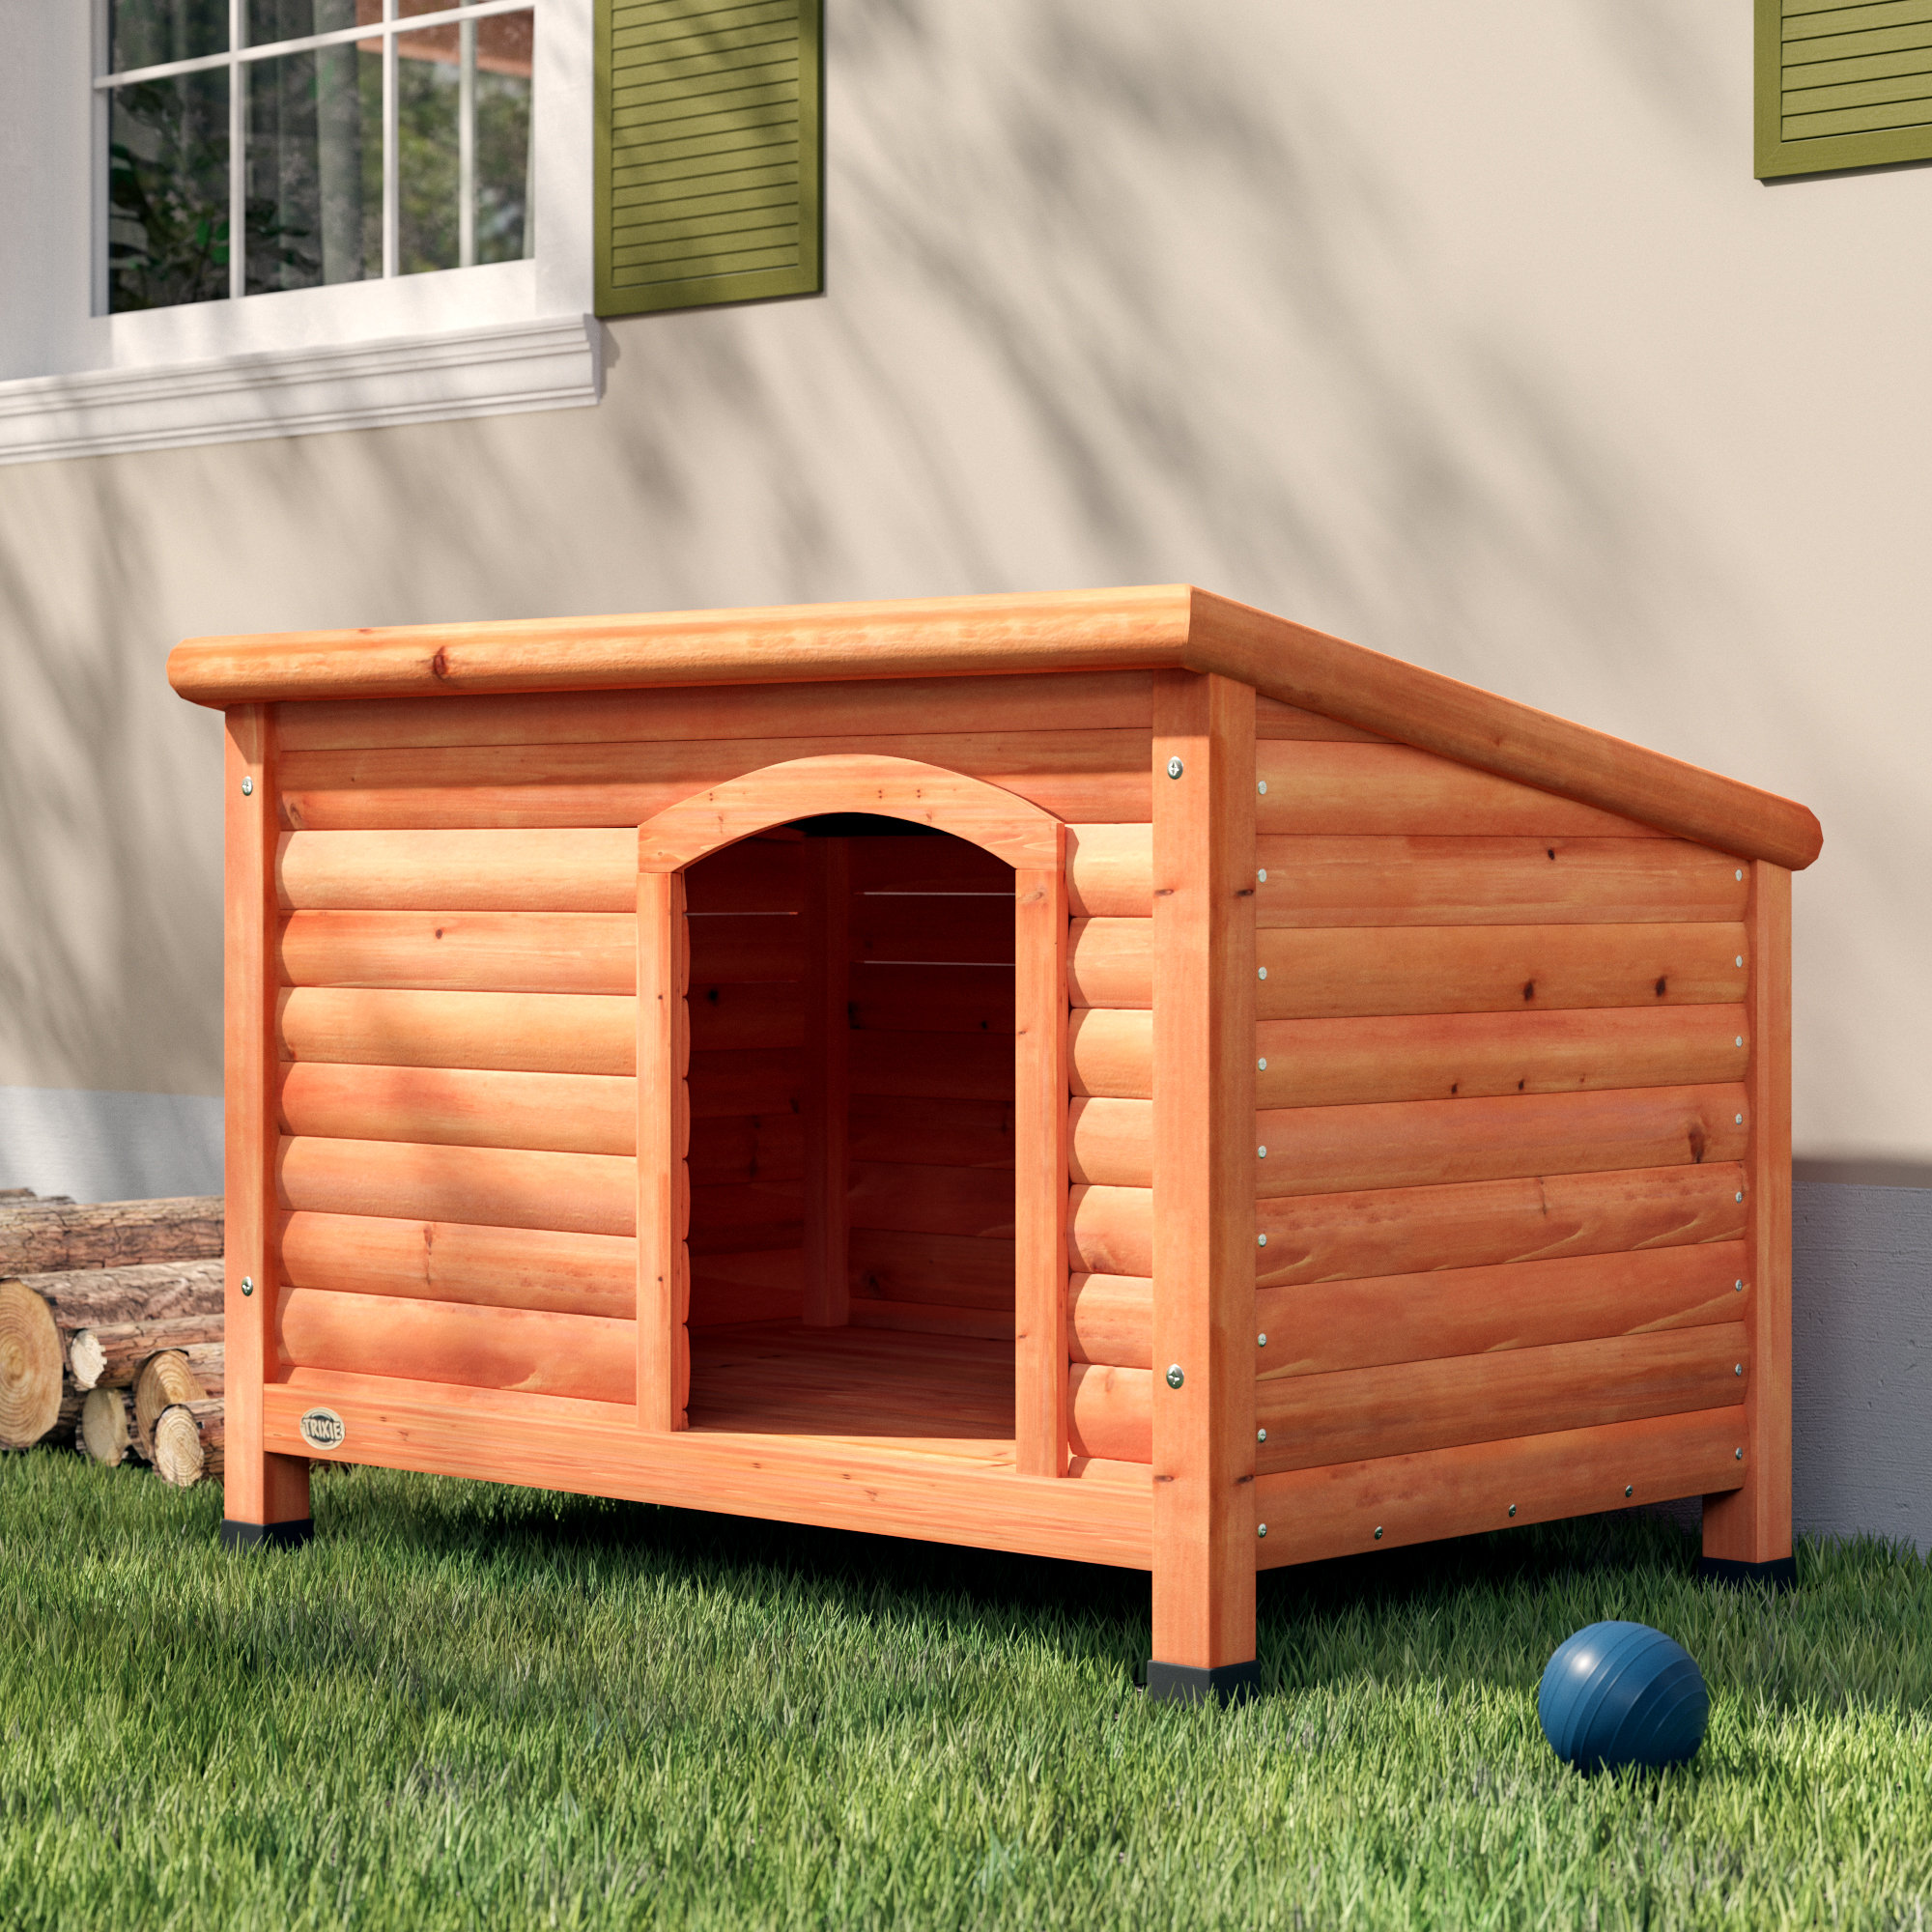 extra large dog houses for multiple dogs